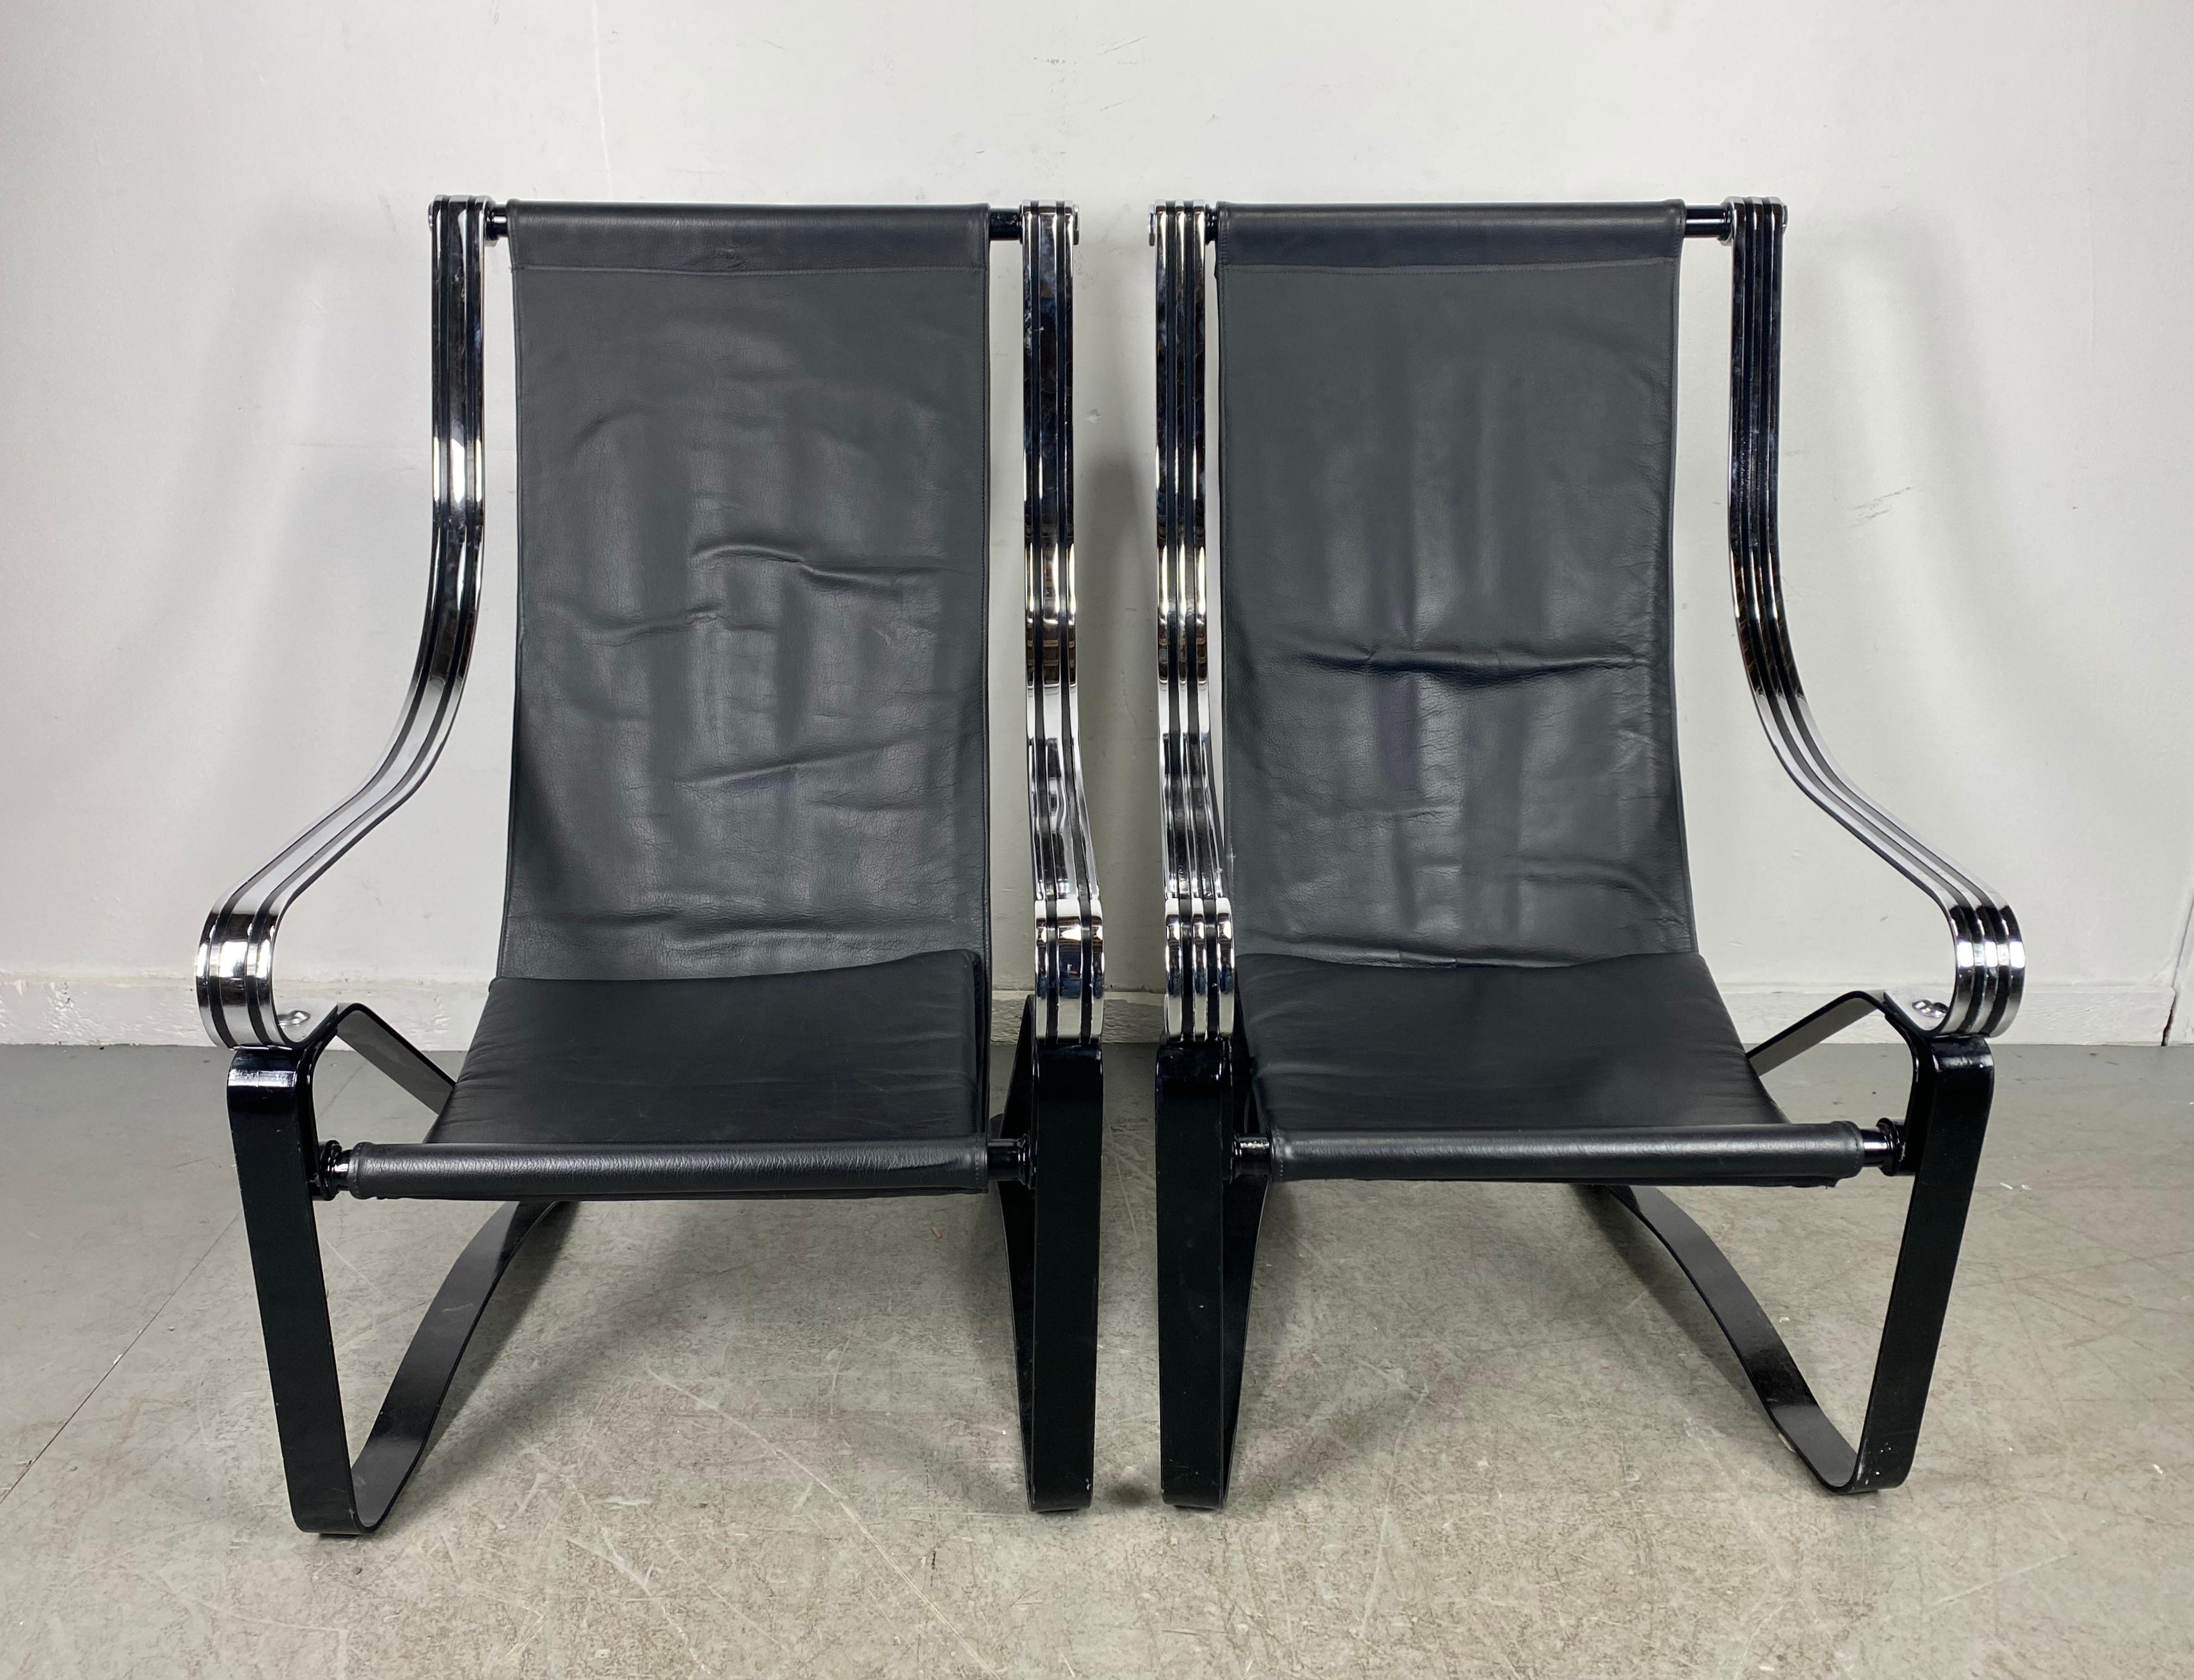 Enamel Machine Age, Art Deco McKay Craft Cantilevered Sling Lounge Chairs